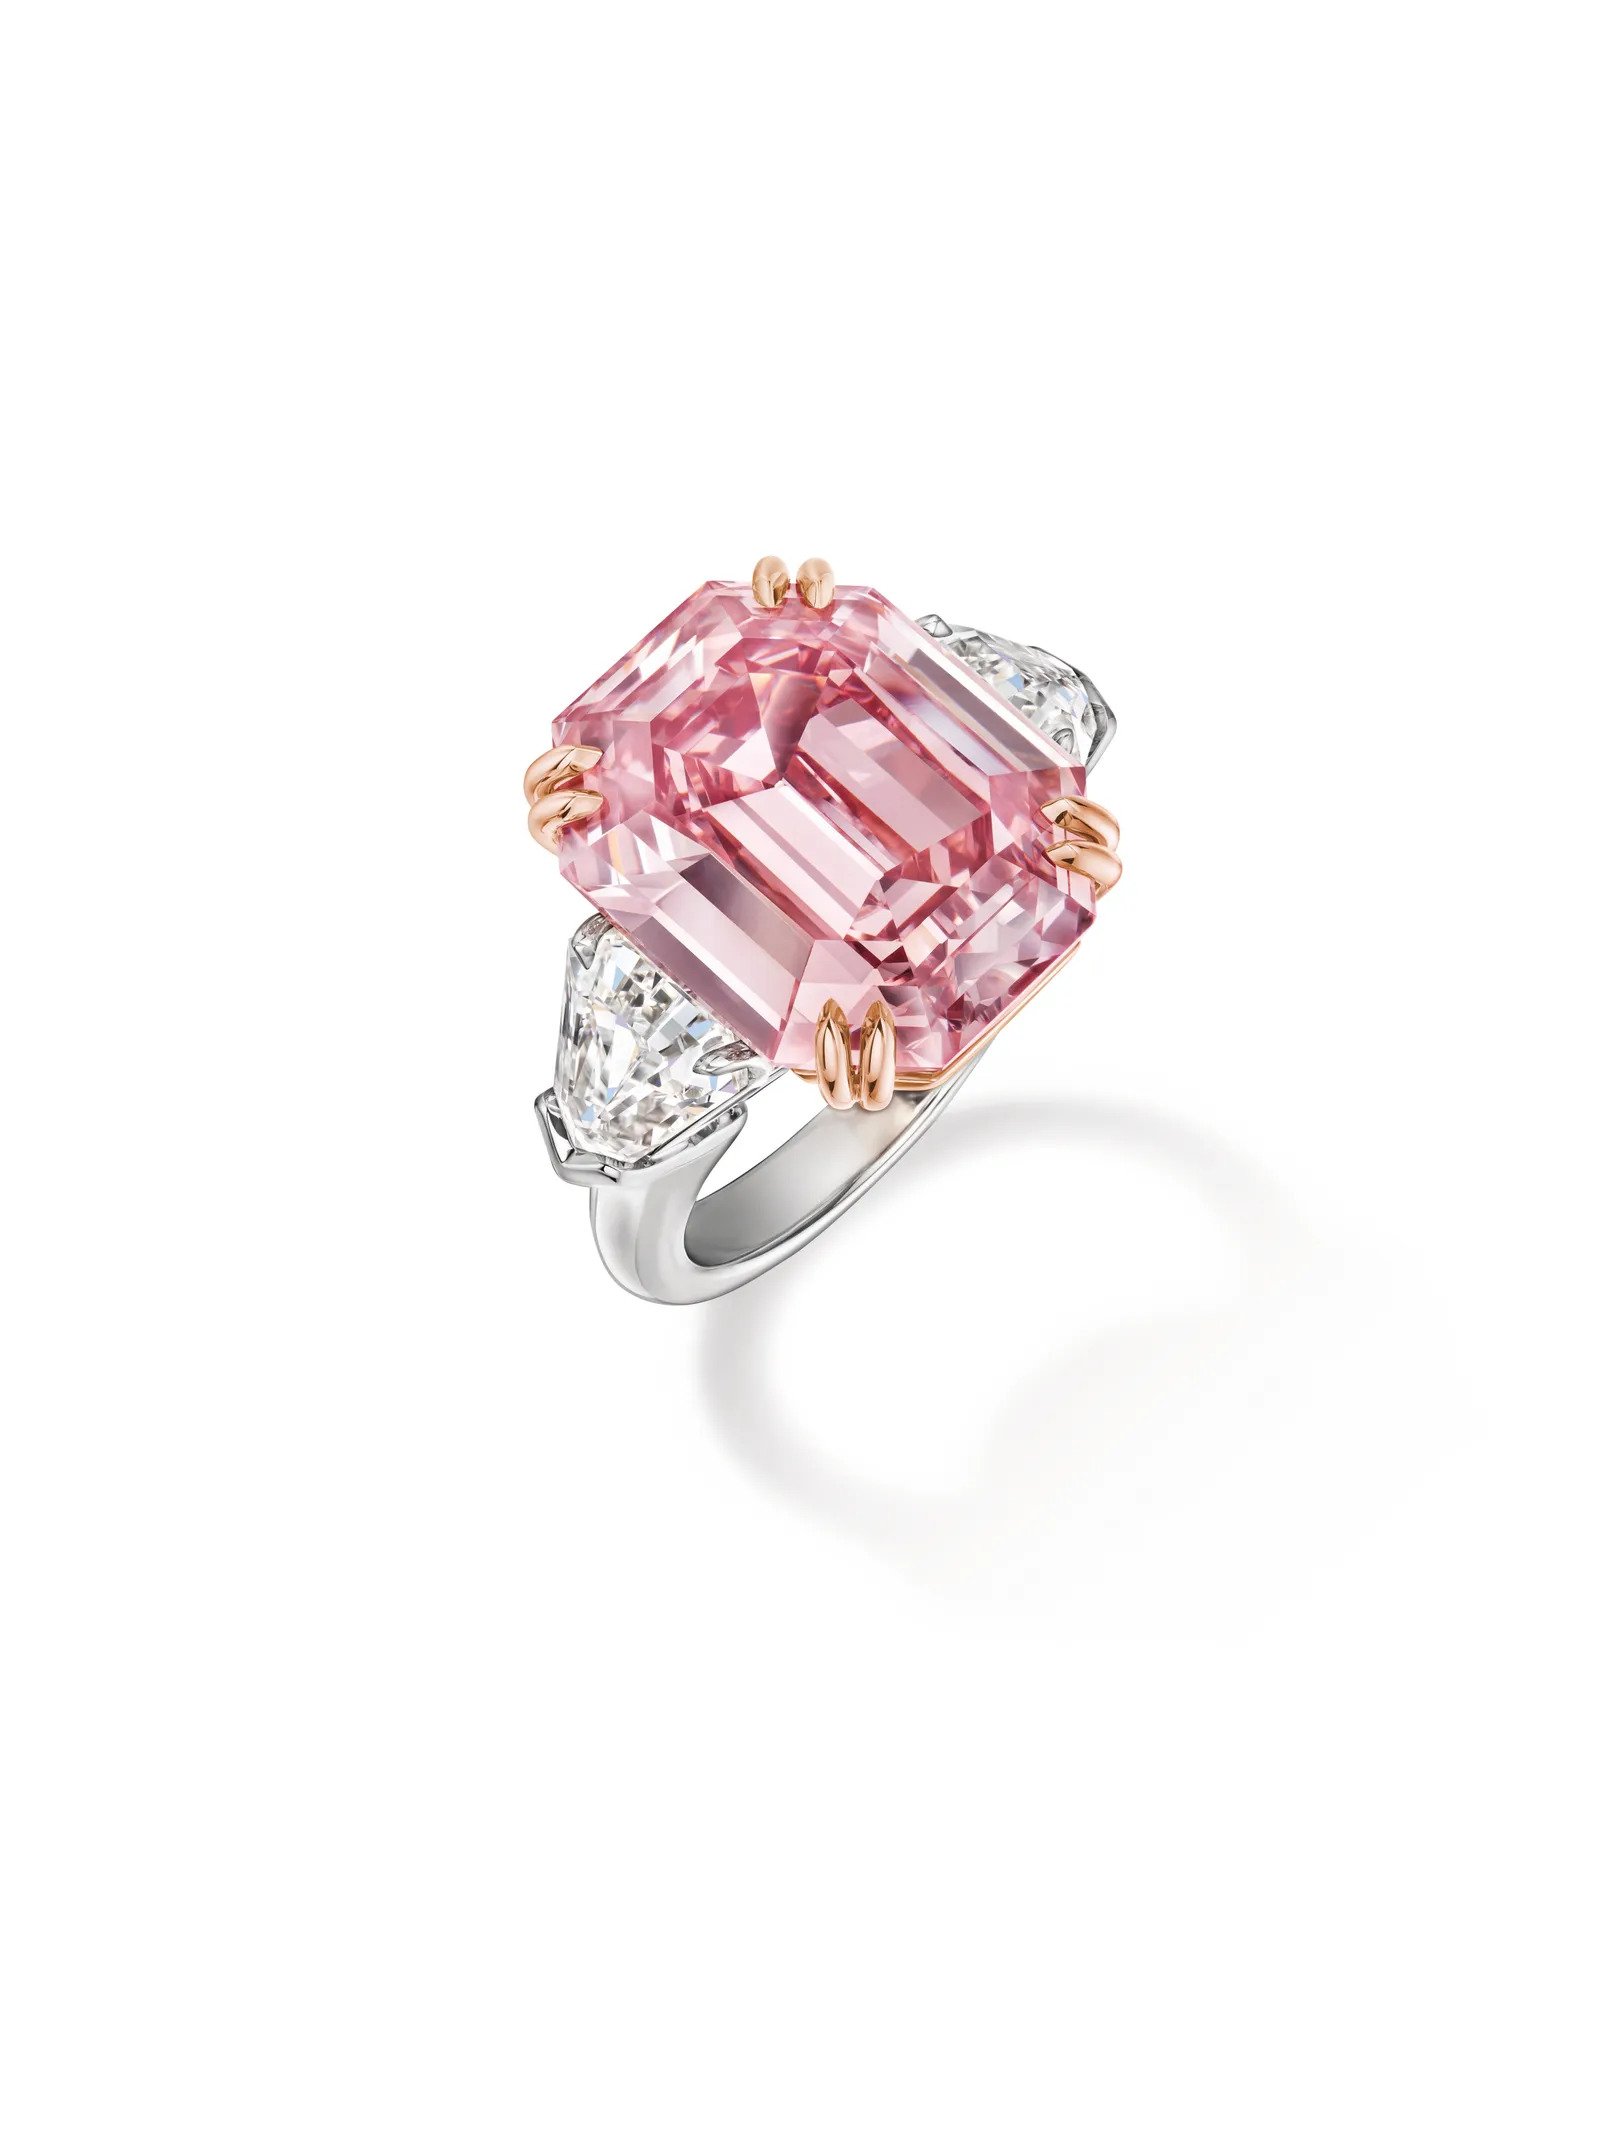 The Prettiest Pink Diamond Engagement Rings